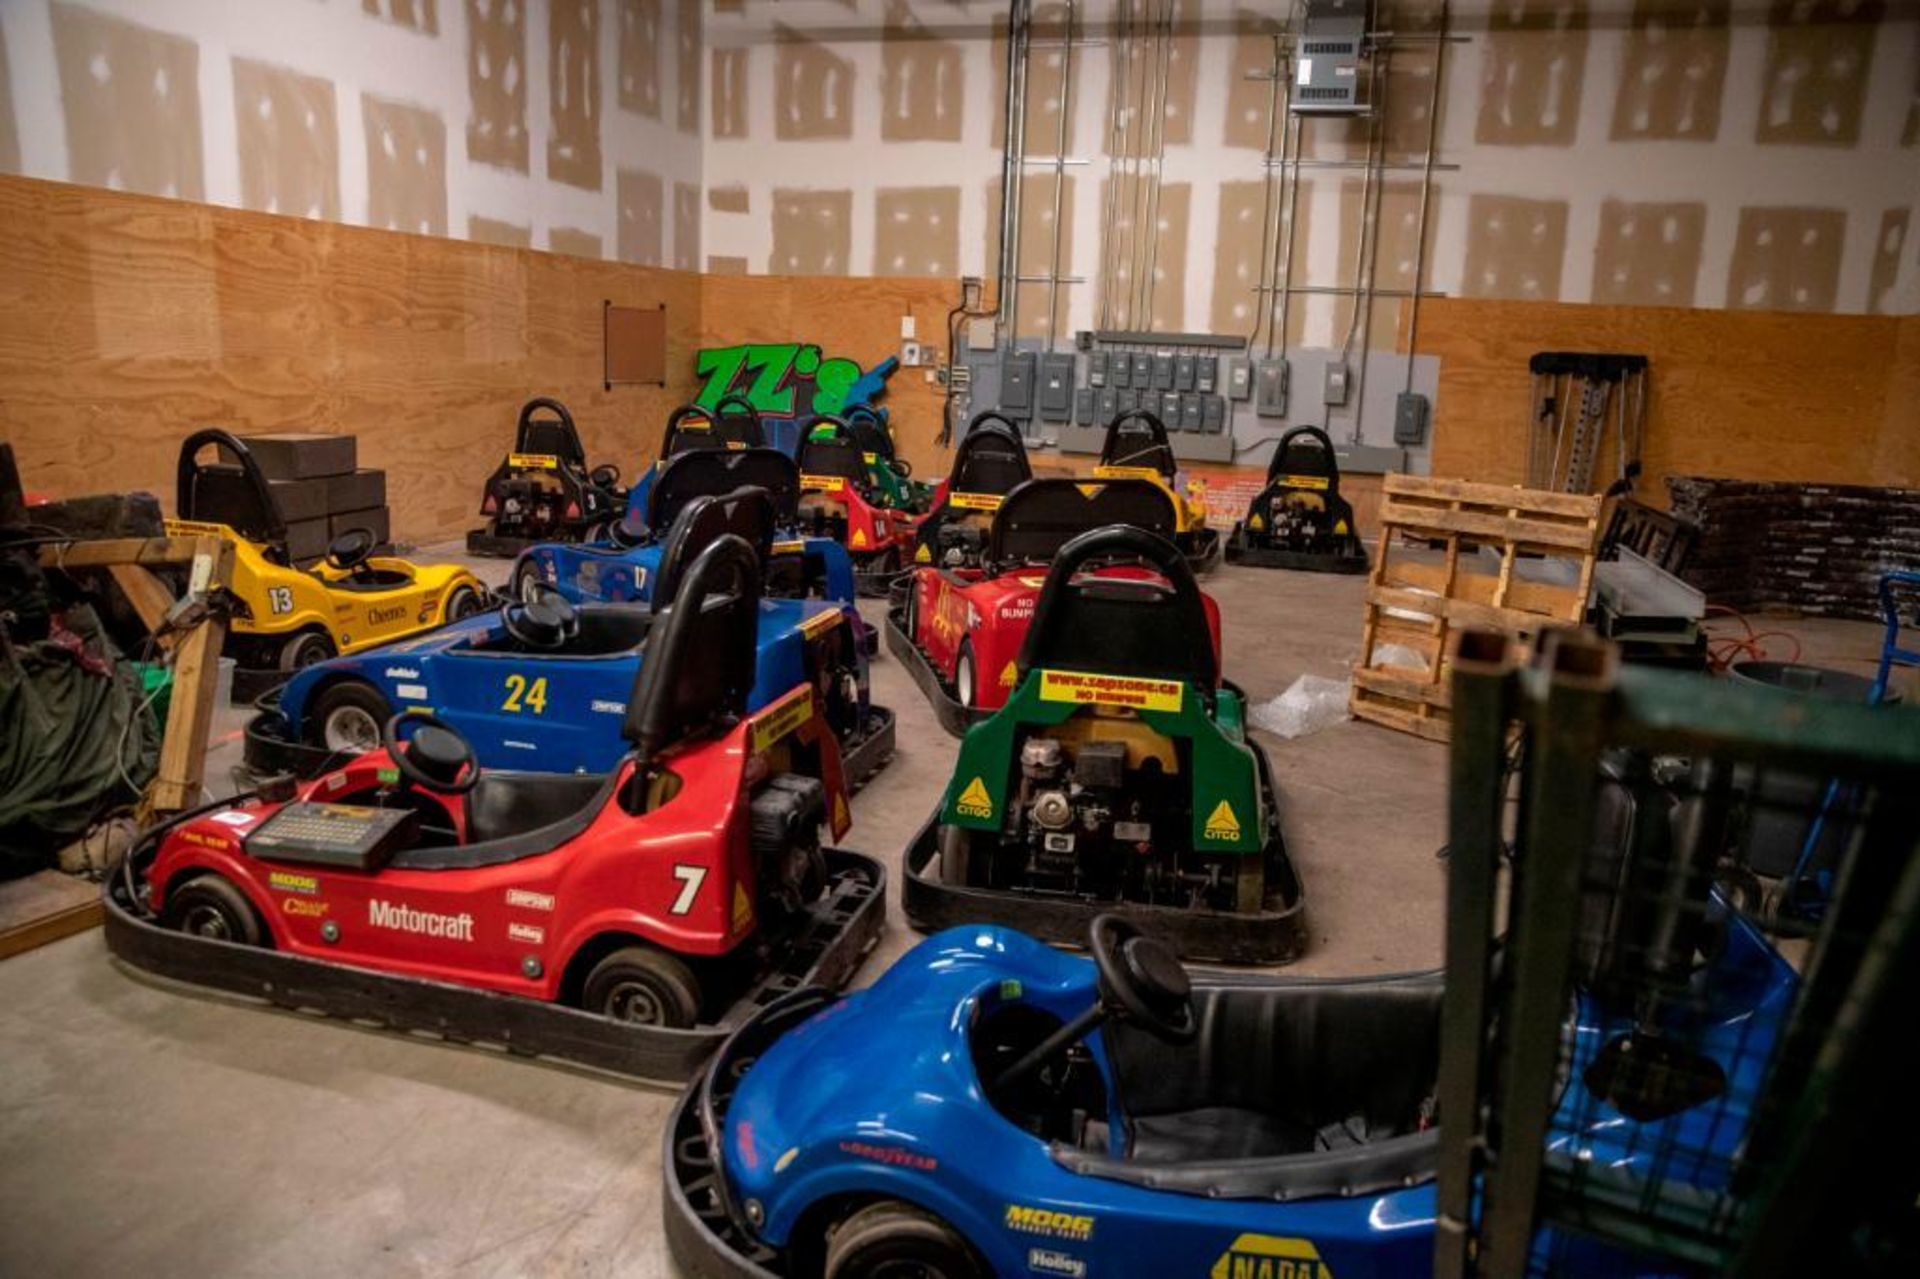 15 single and 3 double go carts made by Creative Carts, Aylmer, Ontario, Canada. - Image 2 of 7